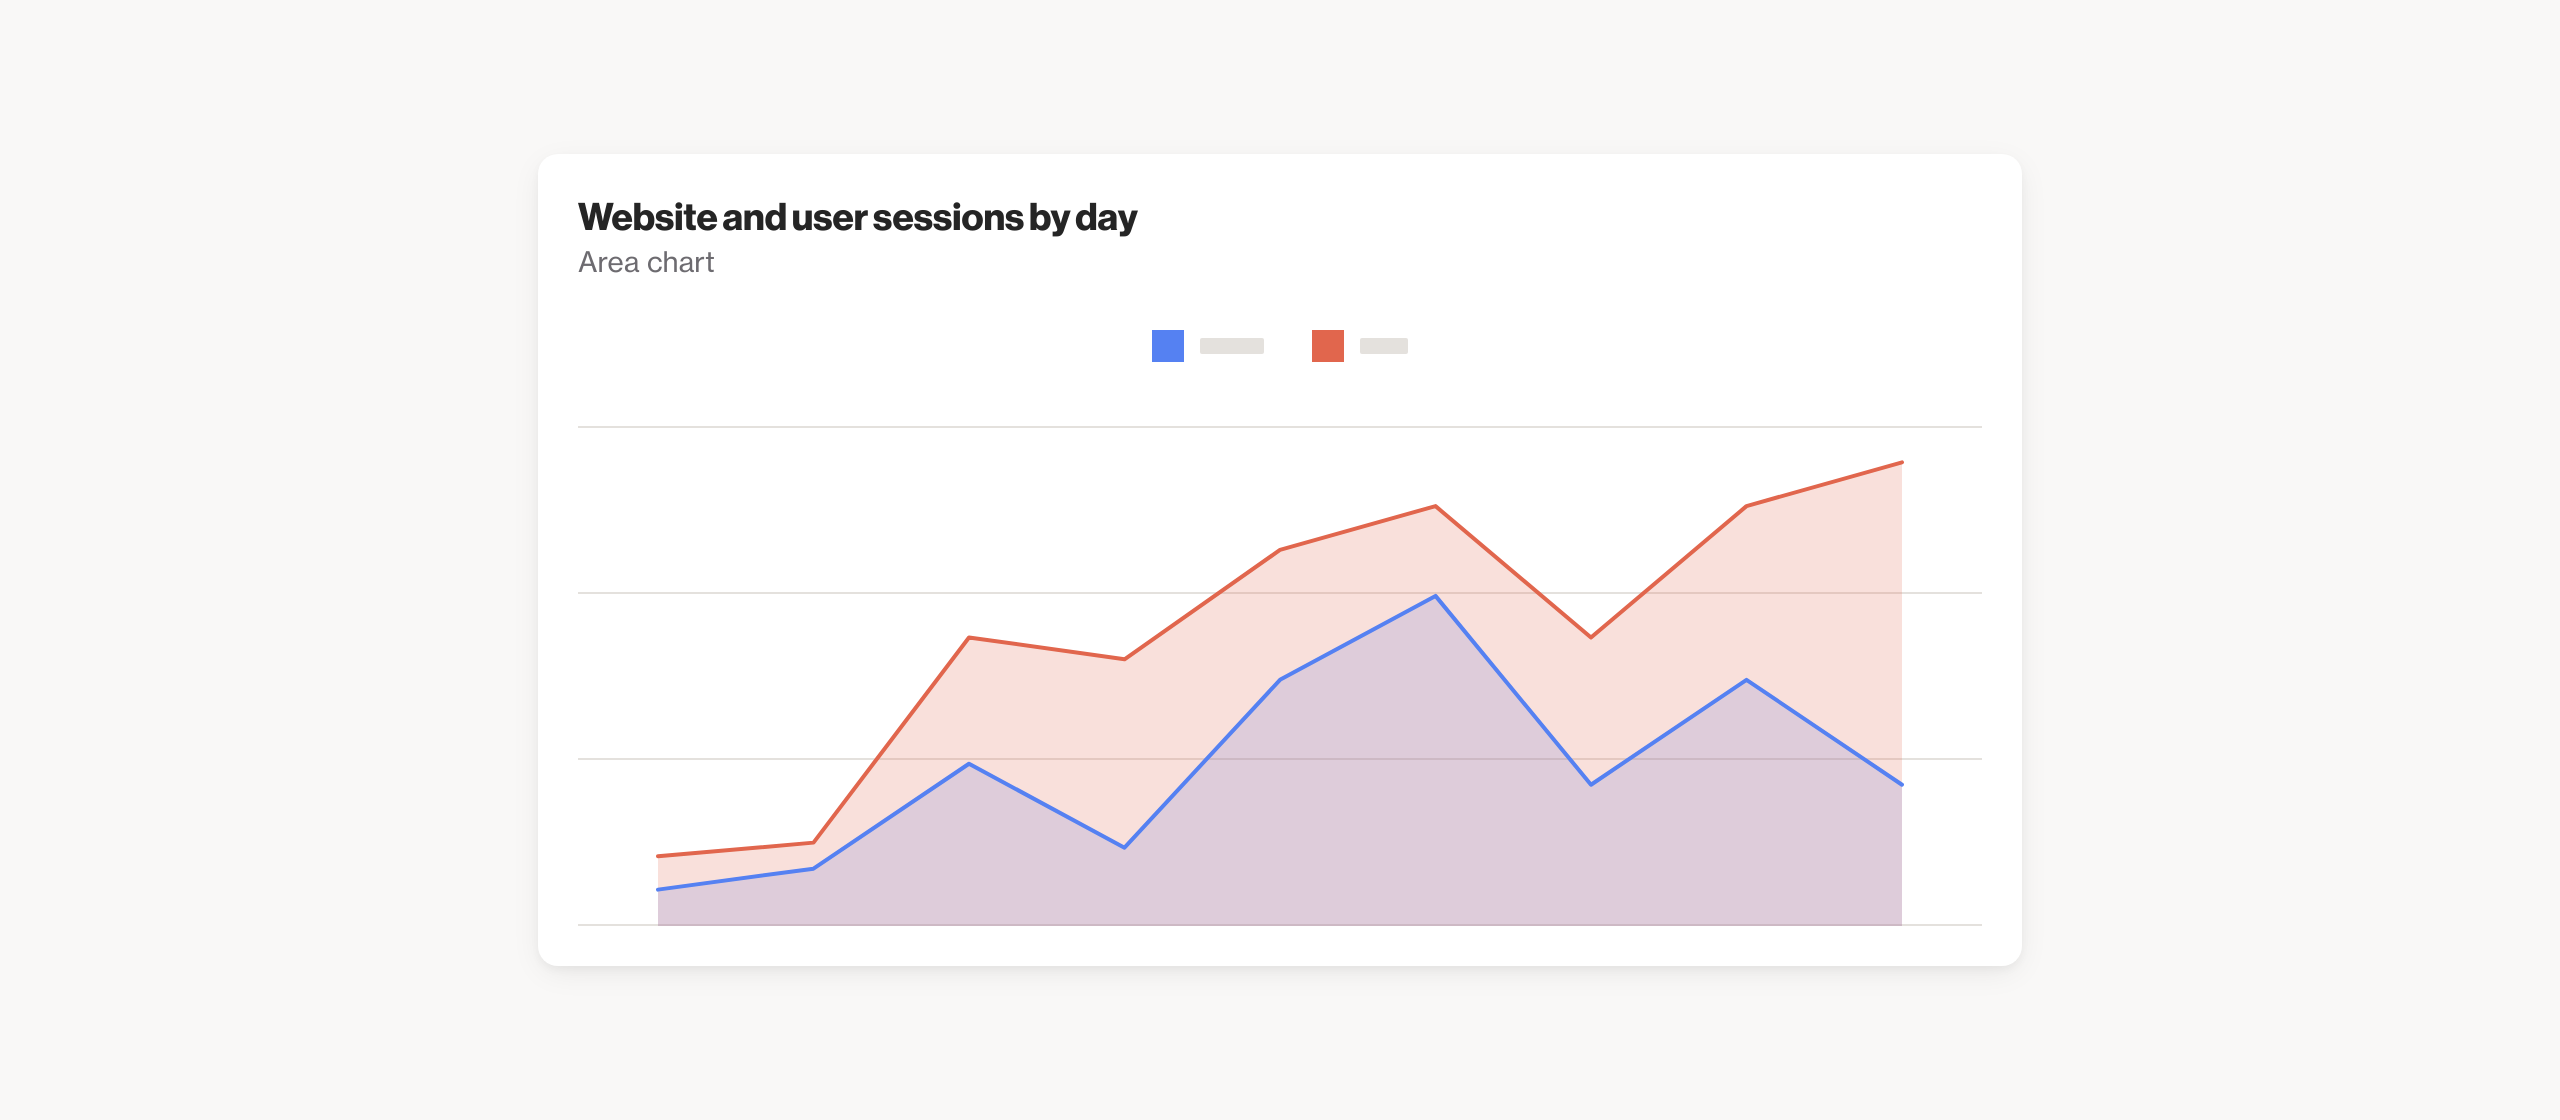 Website and user sessions by day